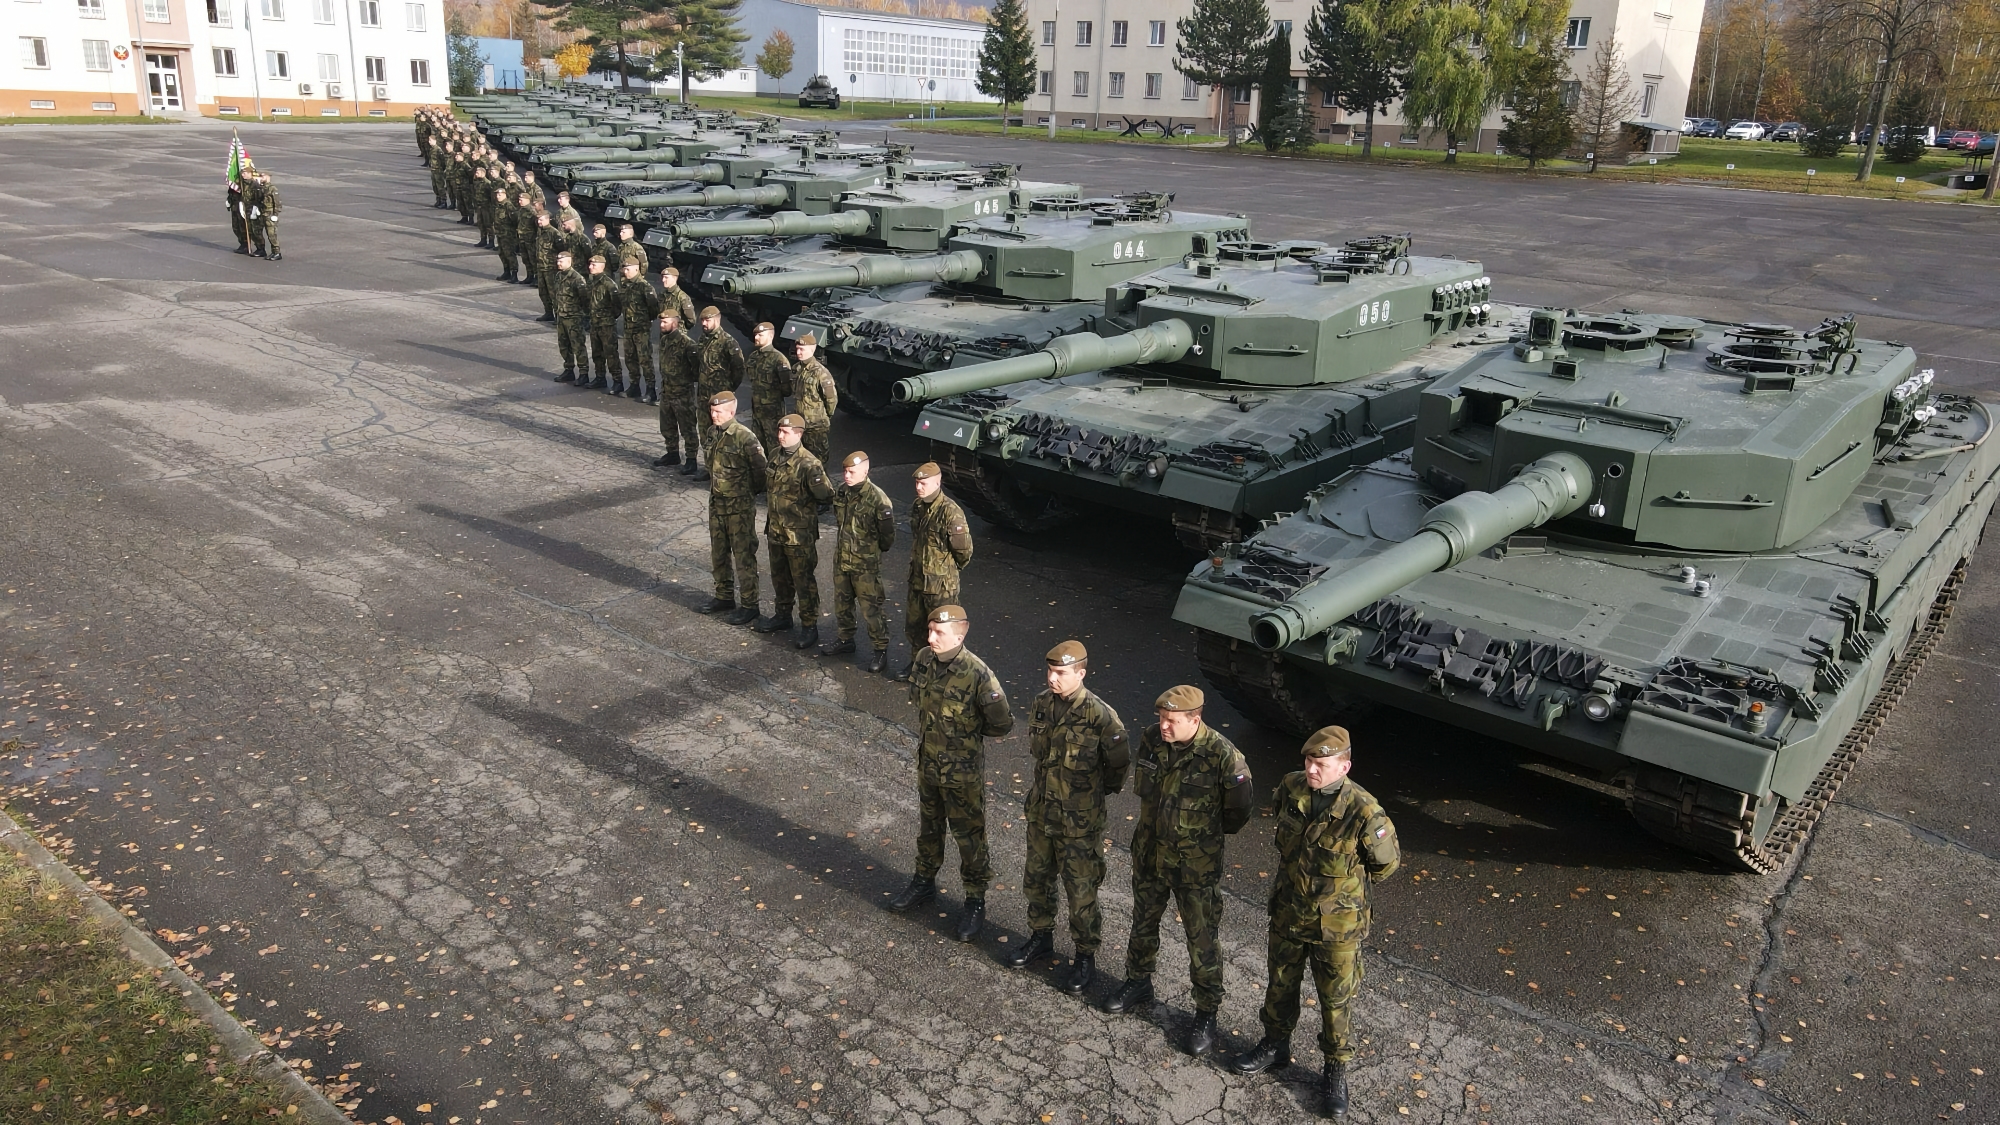 Germany will transfer an additional batch of Leopard 2A4 tanks to the Czech Republic